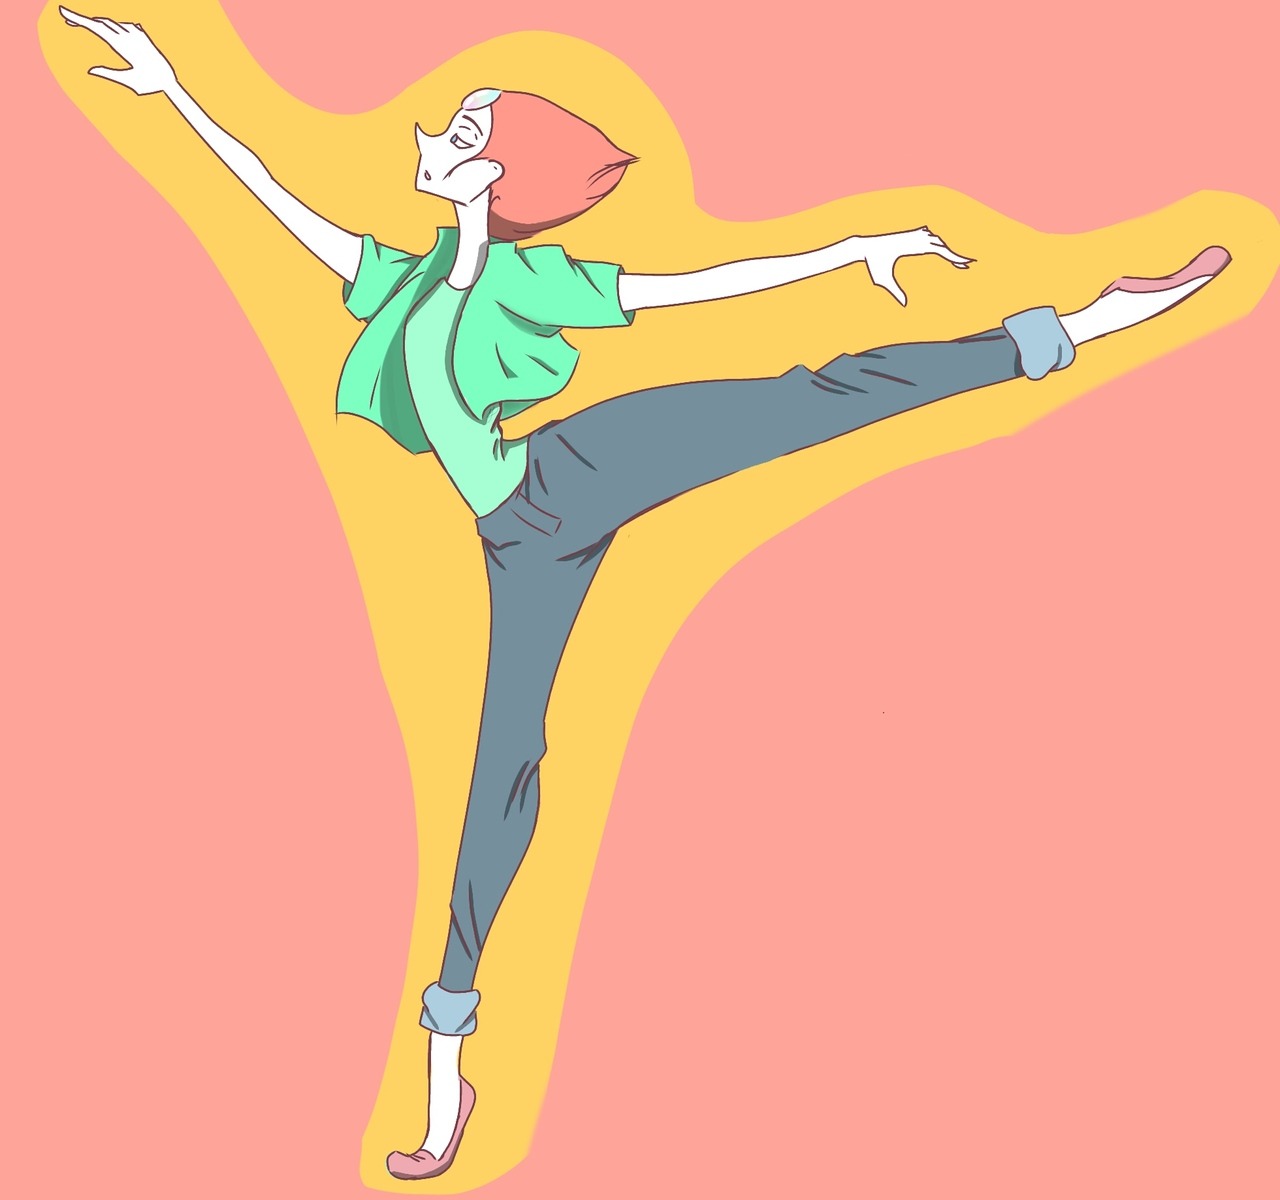 Oh look, a Pearl